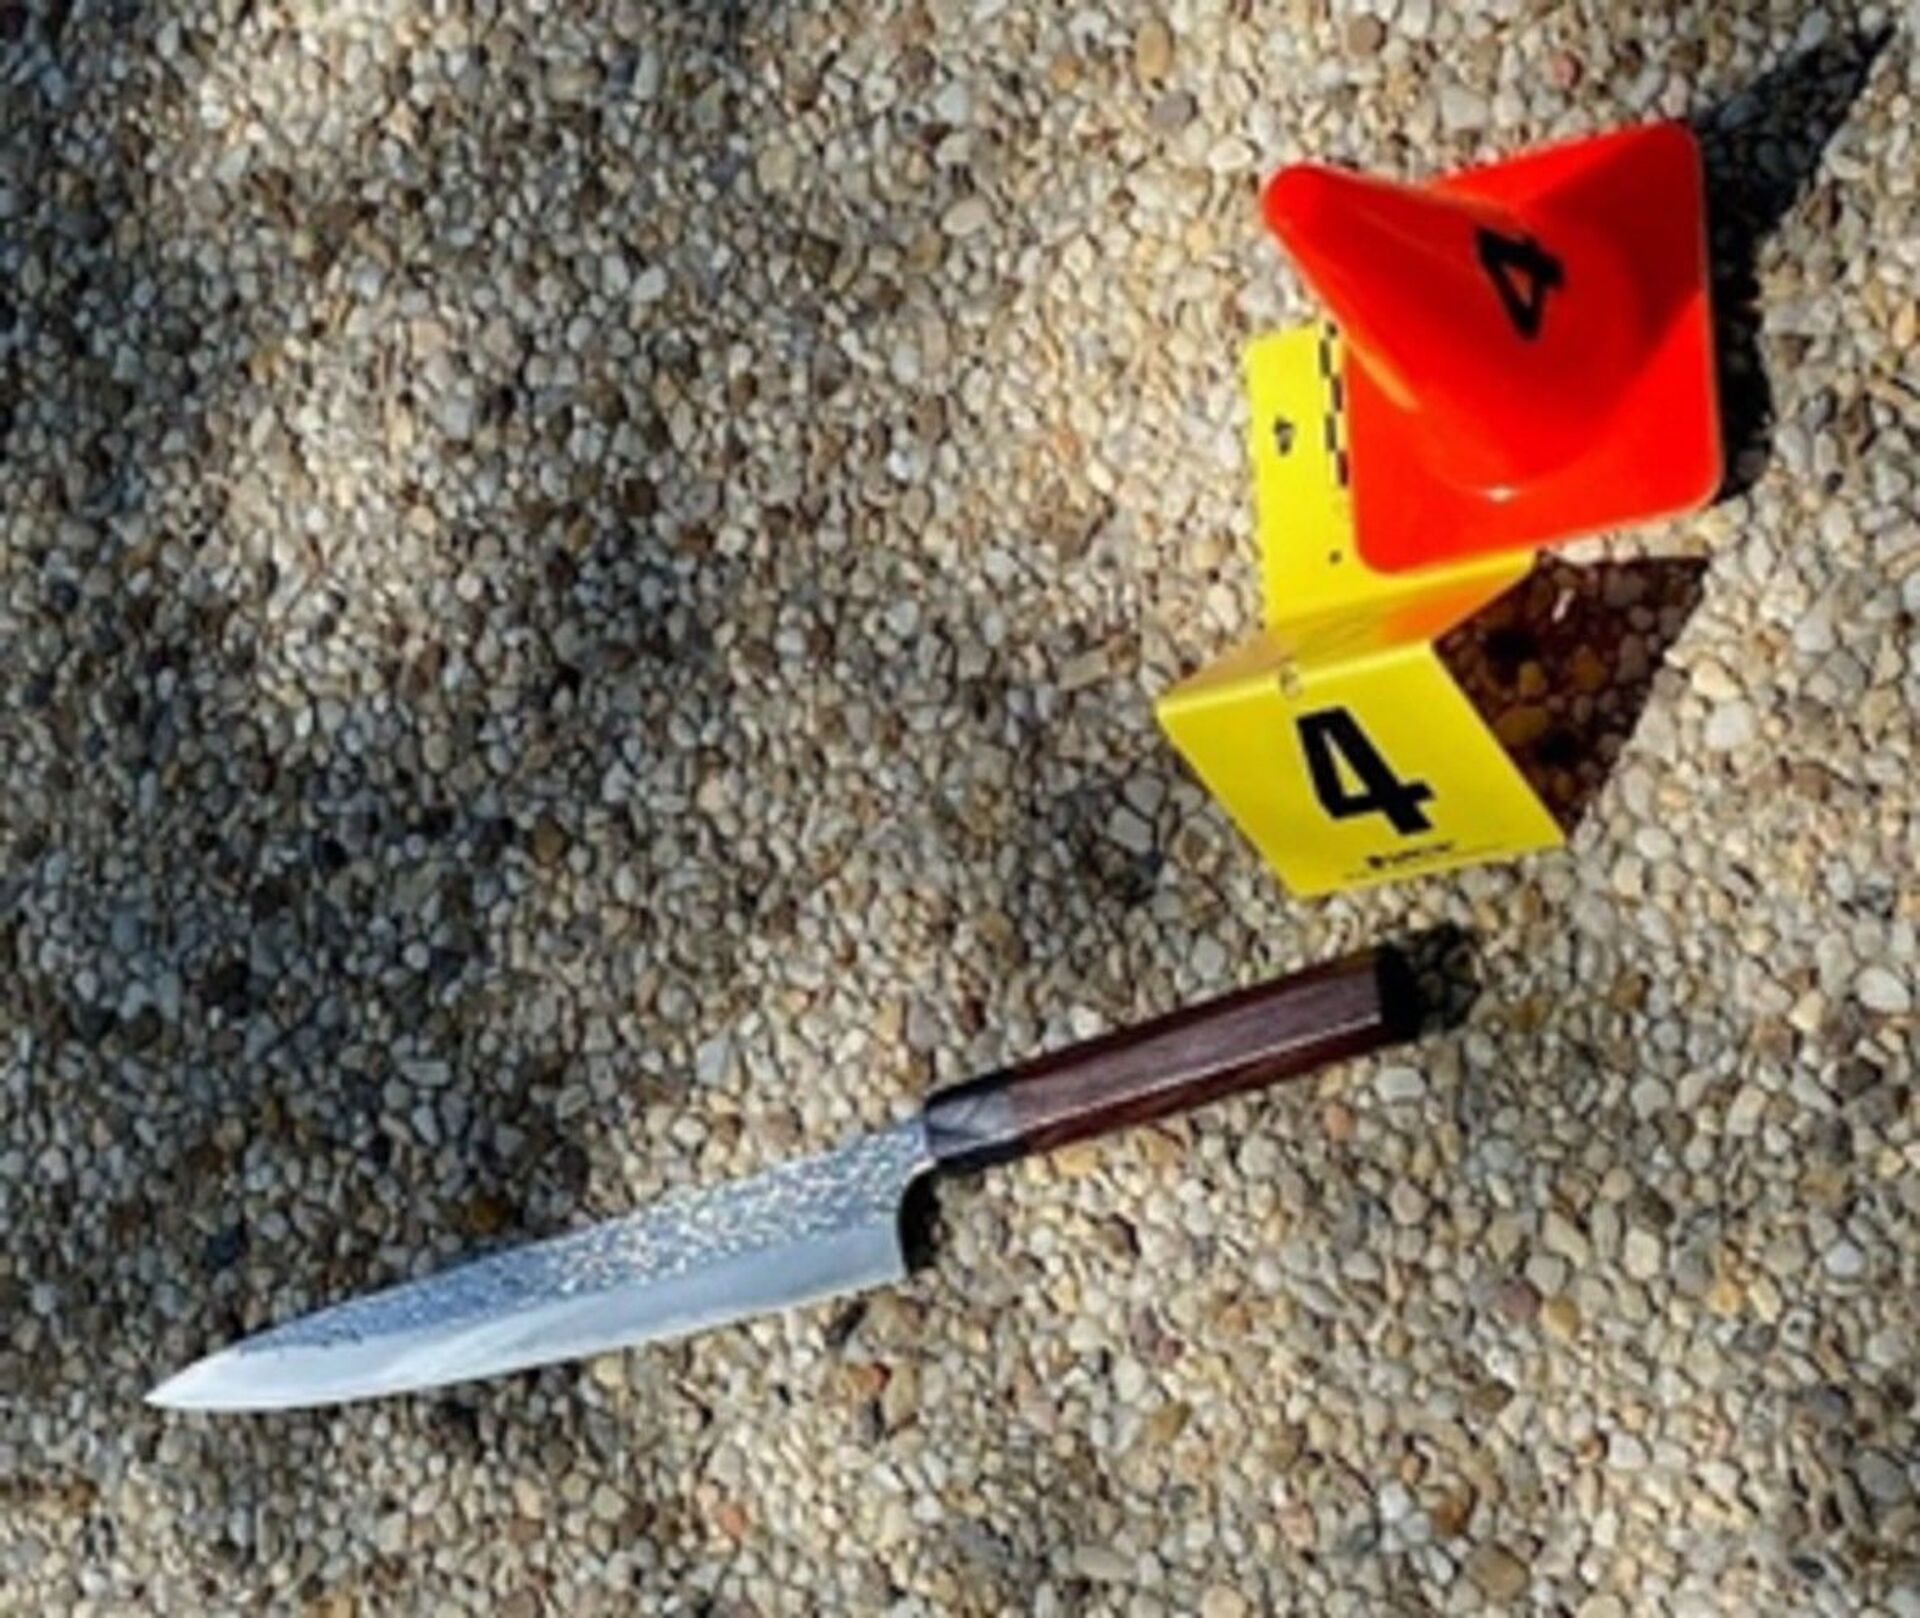 DC Police Release Photo of Knife Wielded by Suspect in Deadly Capitol Attack  - Sputnik International, 1920, 06.04.2021